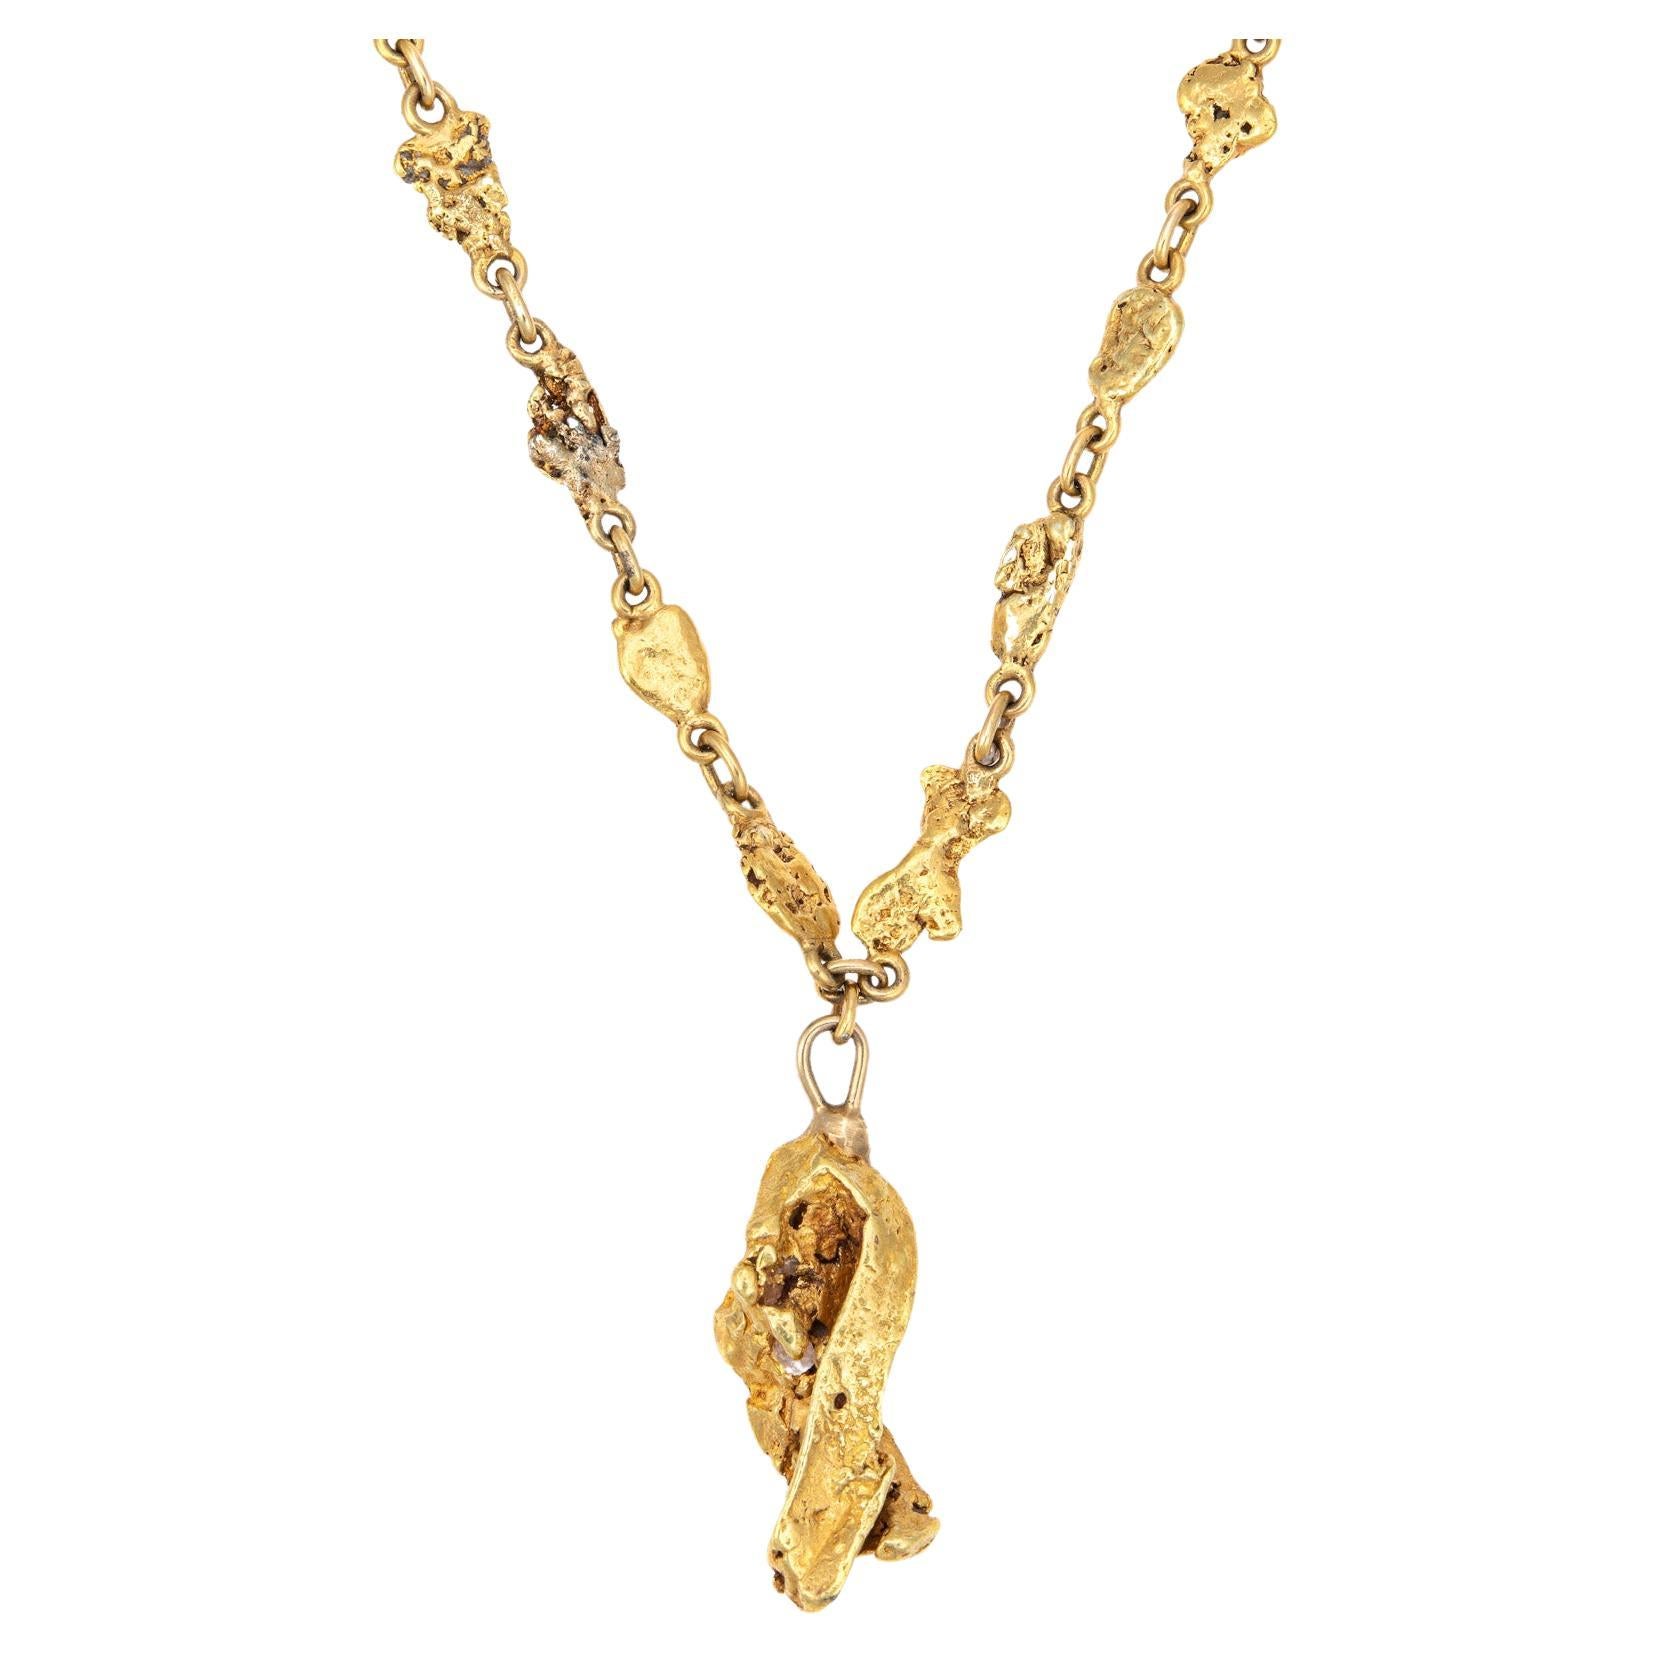 Antique Victorian Gold Nugget Necklace 18" Chain Drop Fine Vintage Jewelry For Sale